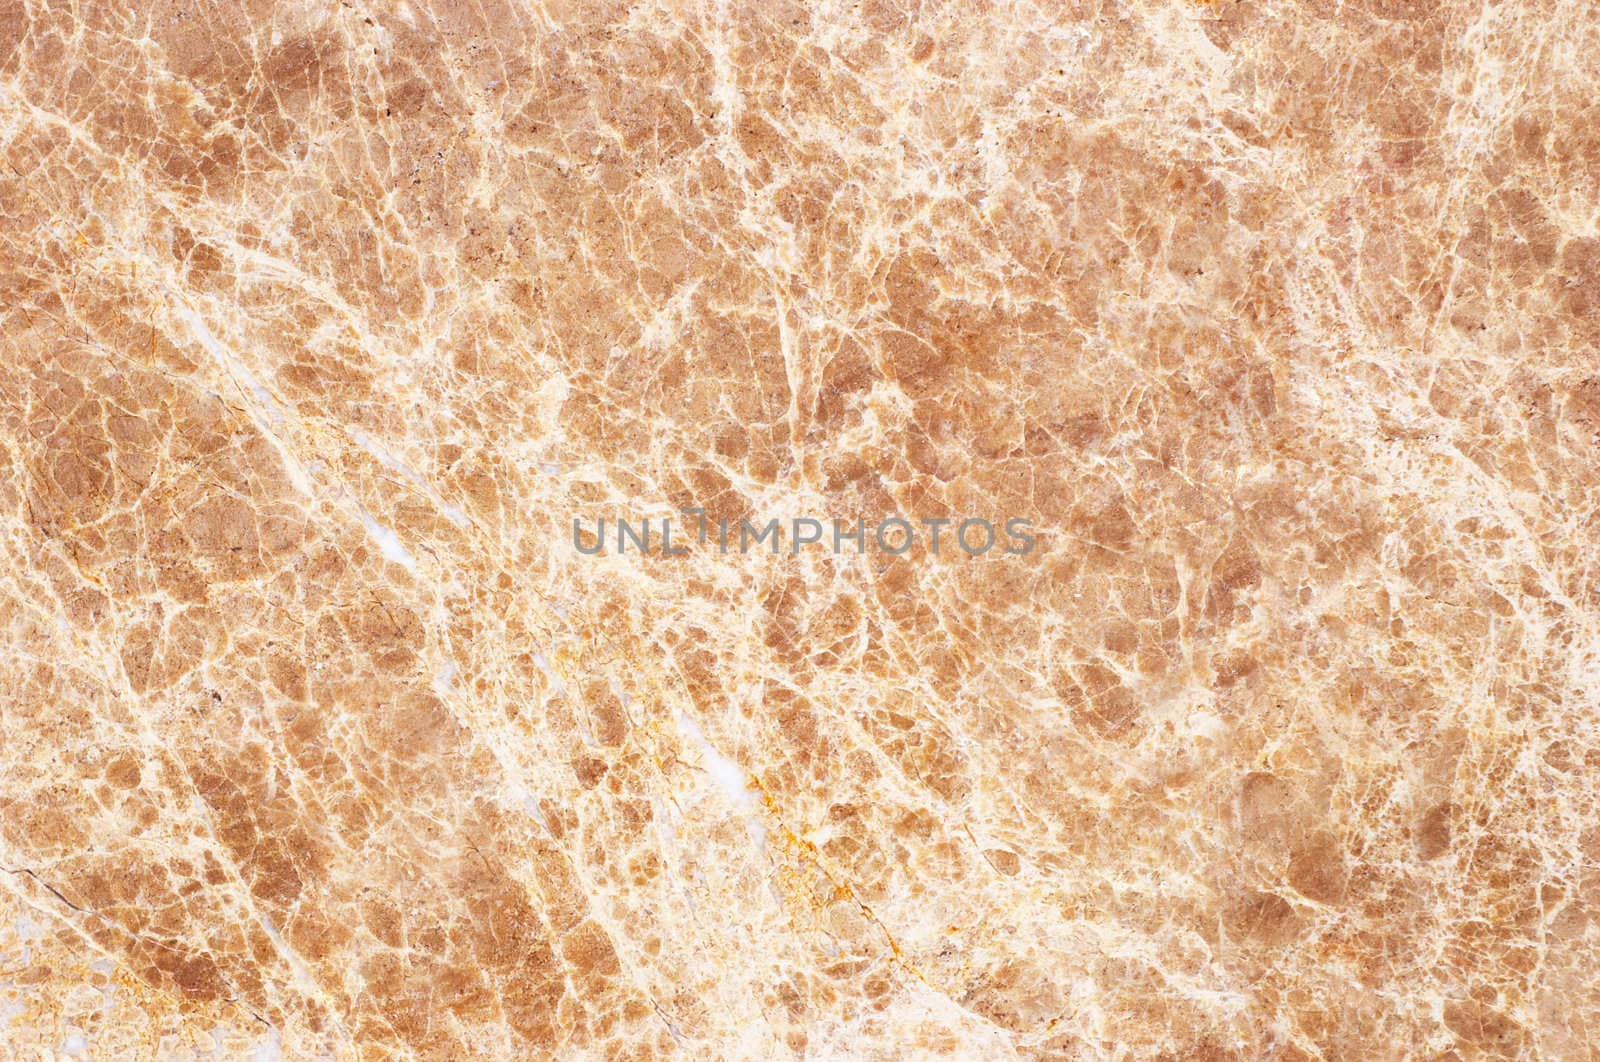 warm colored marble material. suitable as textured background.